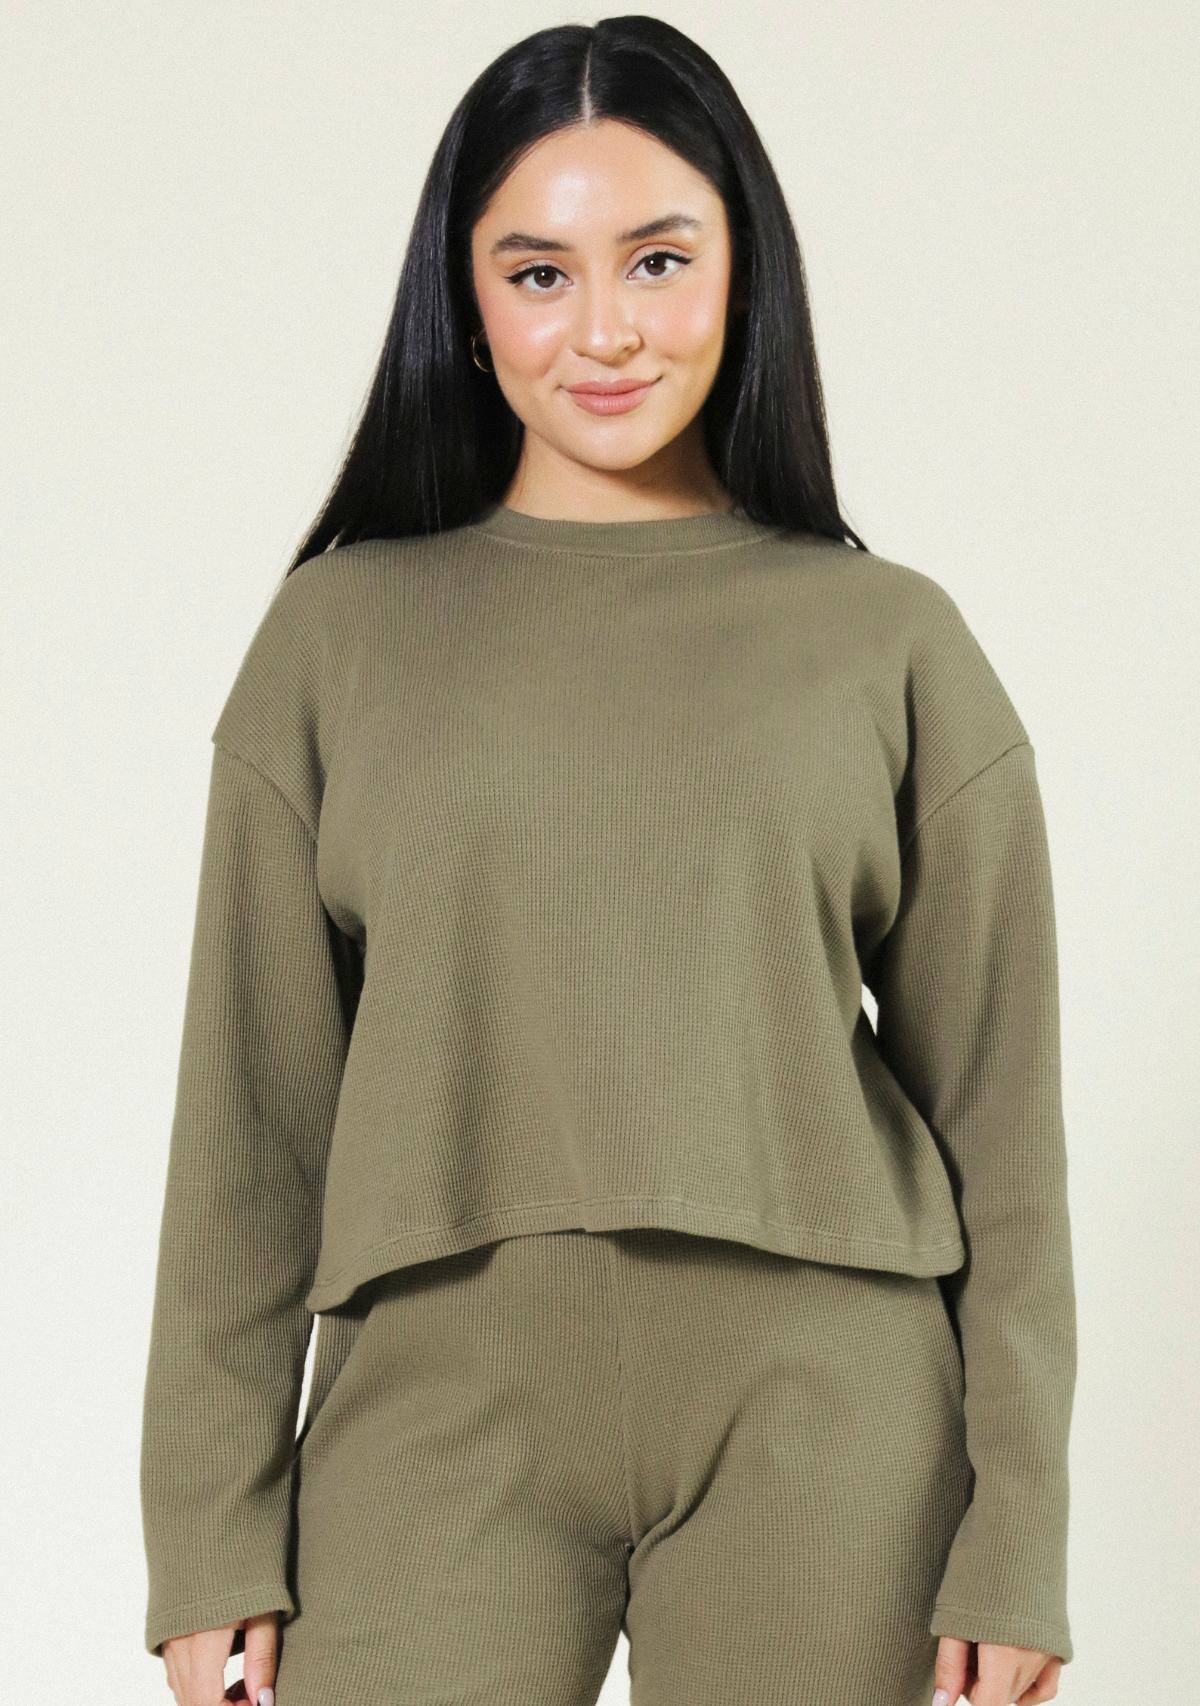 Organic Cotton Pajama Waffle Top Olive Women's Sizes XS-3X made ethically in California.